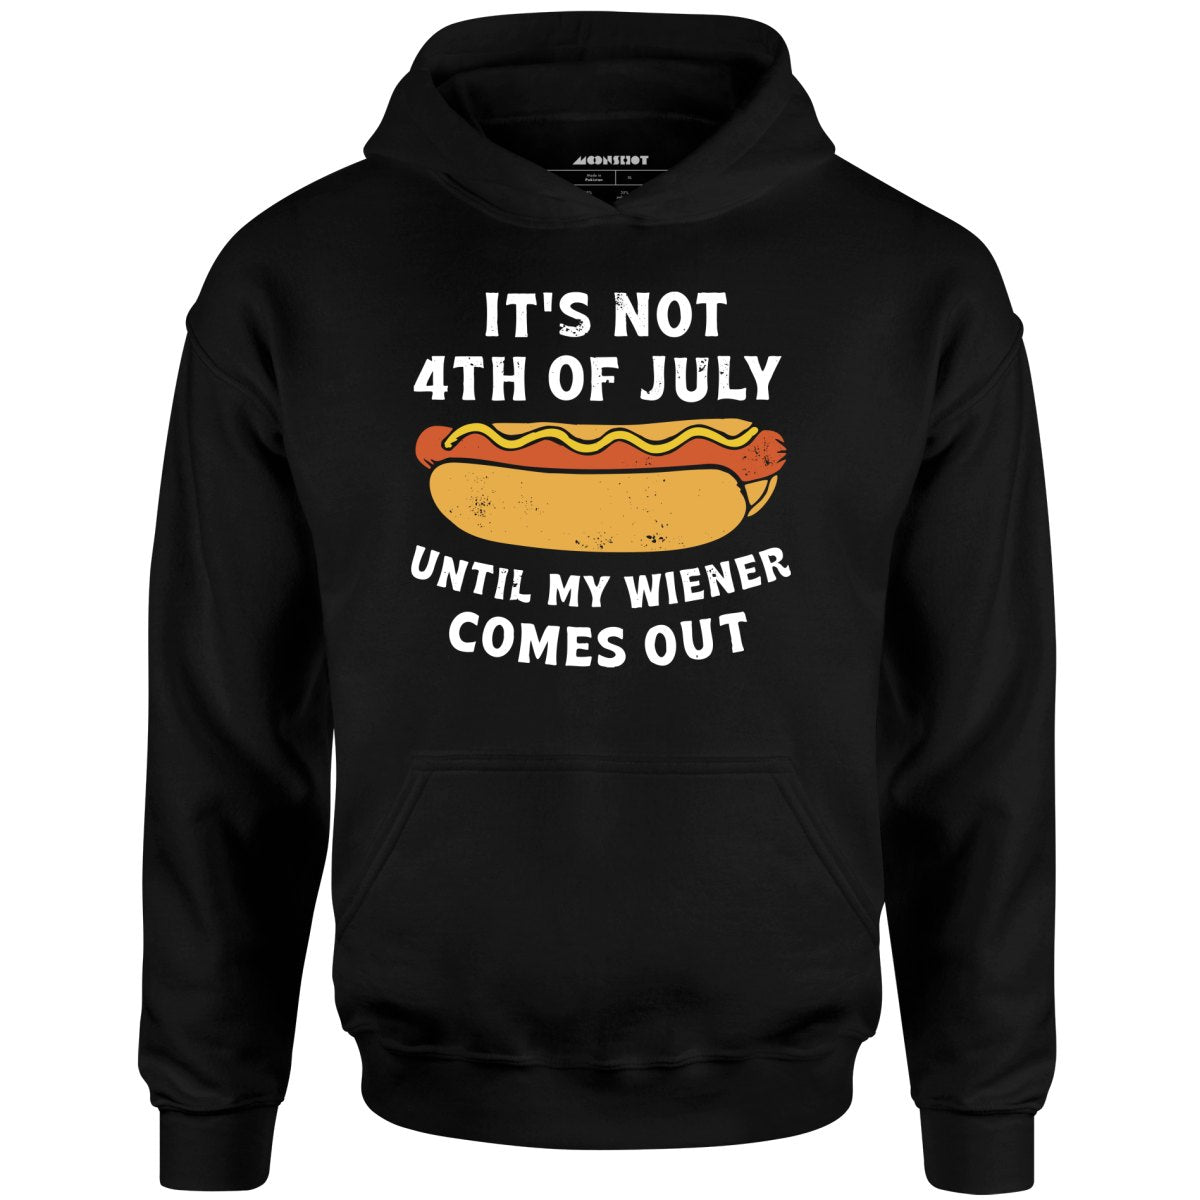 It's Not 4th of July Until My Wiener Comes Out - Unisex Hoodie